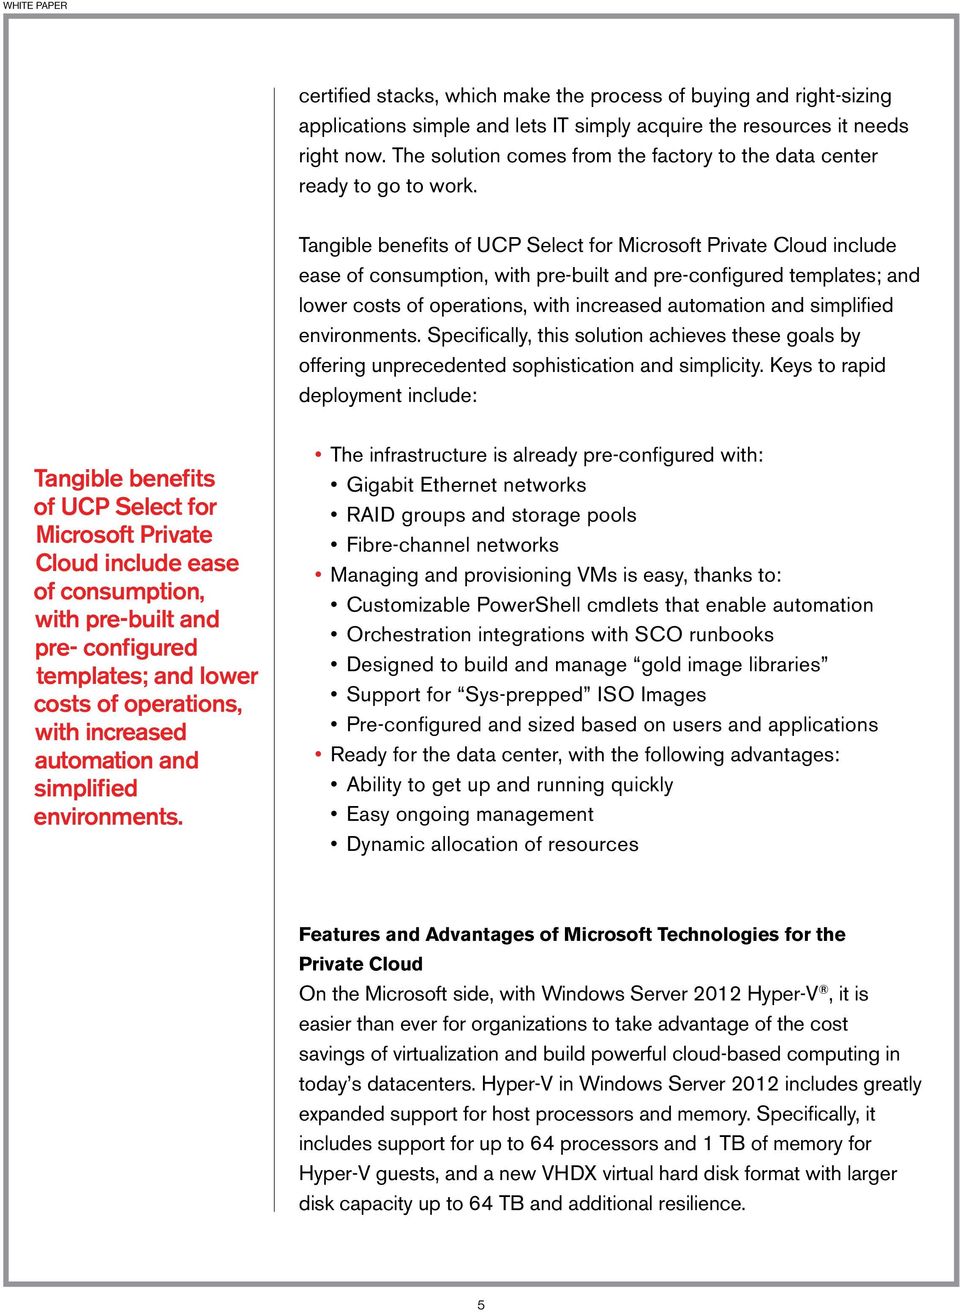 Tangible benefits of UCP Select for Microsoft Private Cloud include ease of consumption, with pre-built and pre-configured templates; and lower costs of operations, with increased automation and